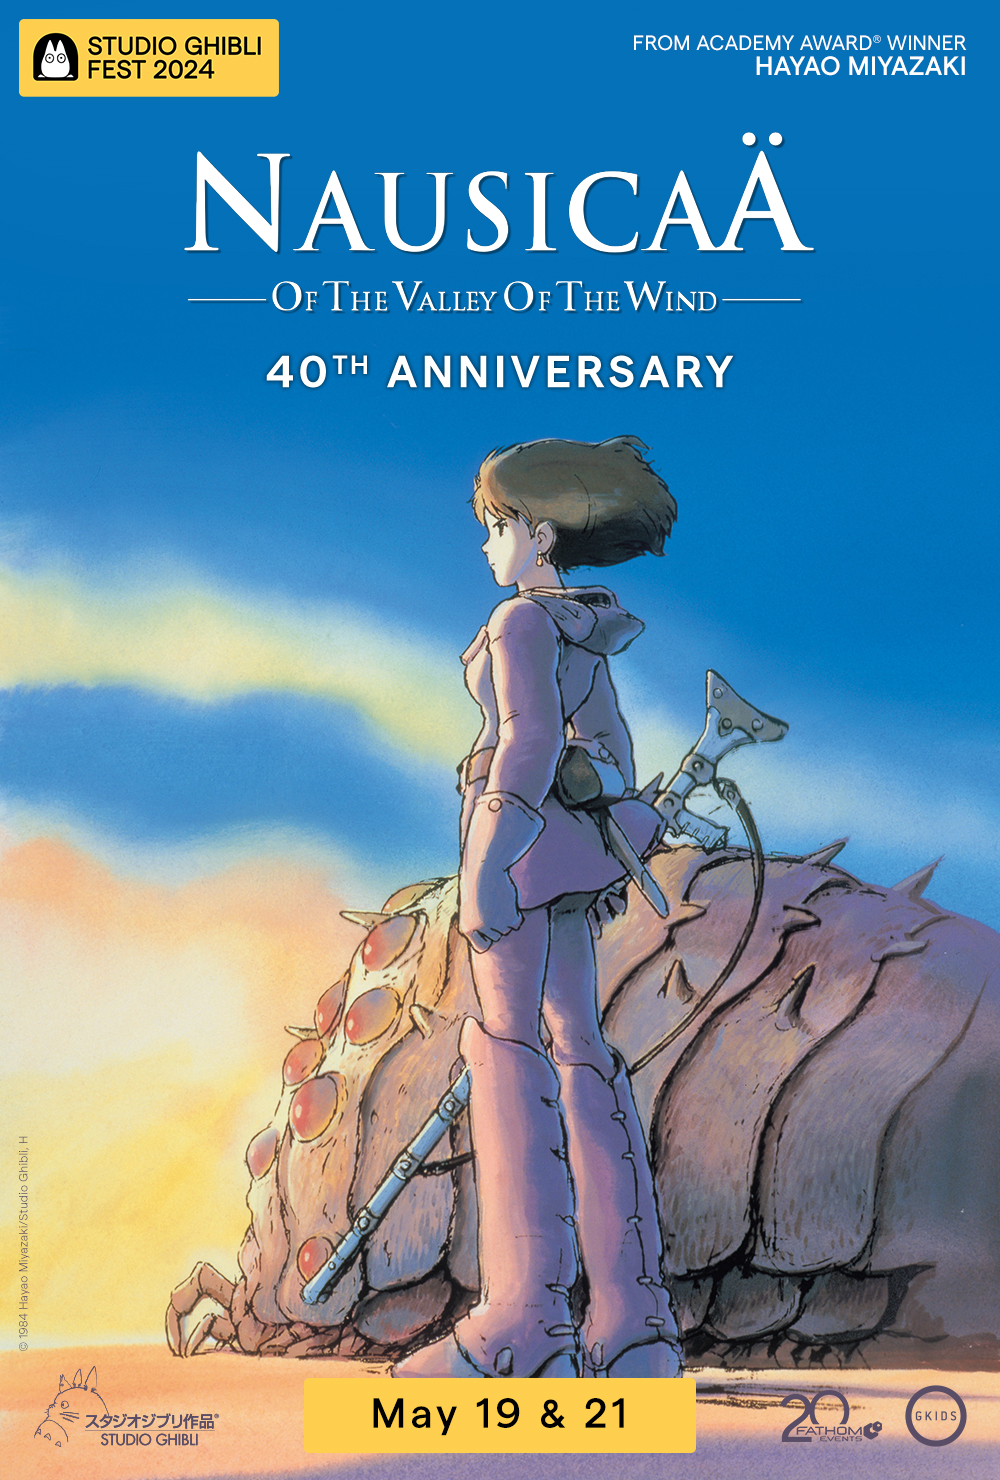 poster movie Nausicaa of the Valley of the Wind 40th Anniversary - Studio Ghibli Fest 2024